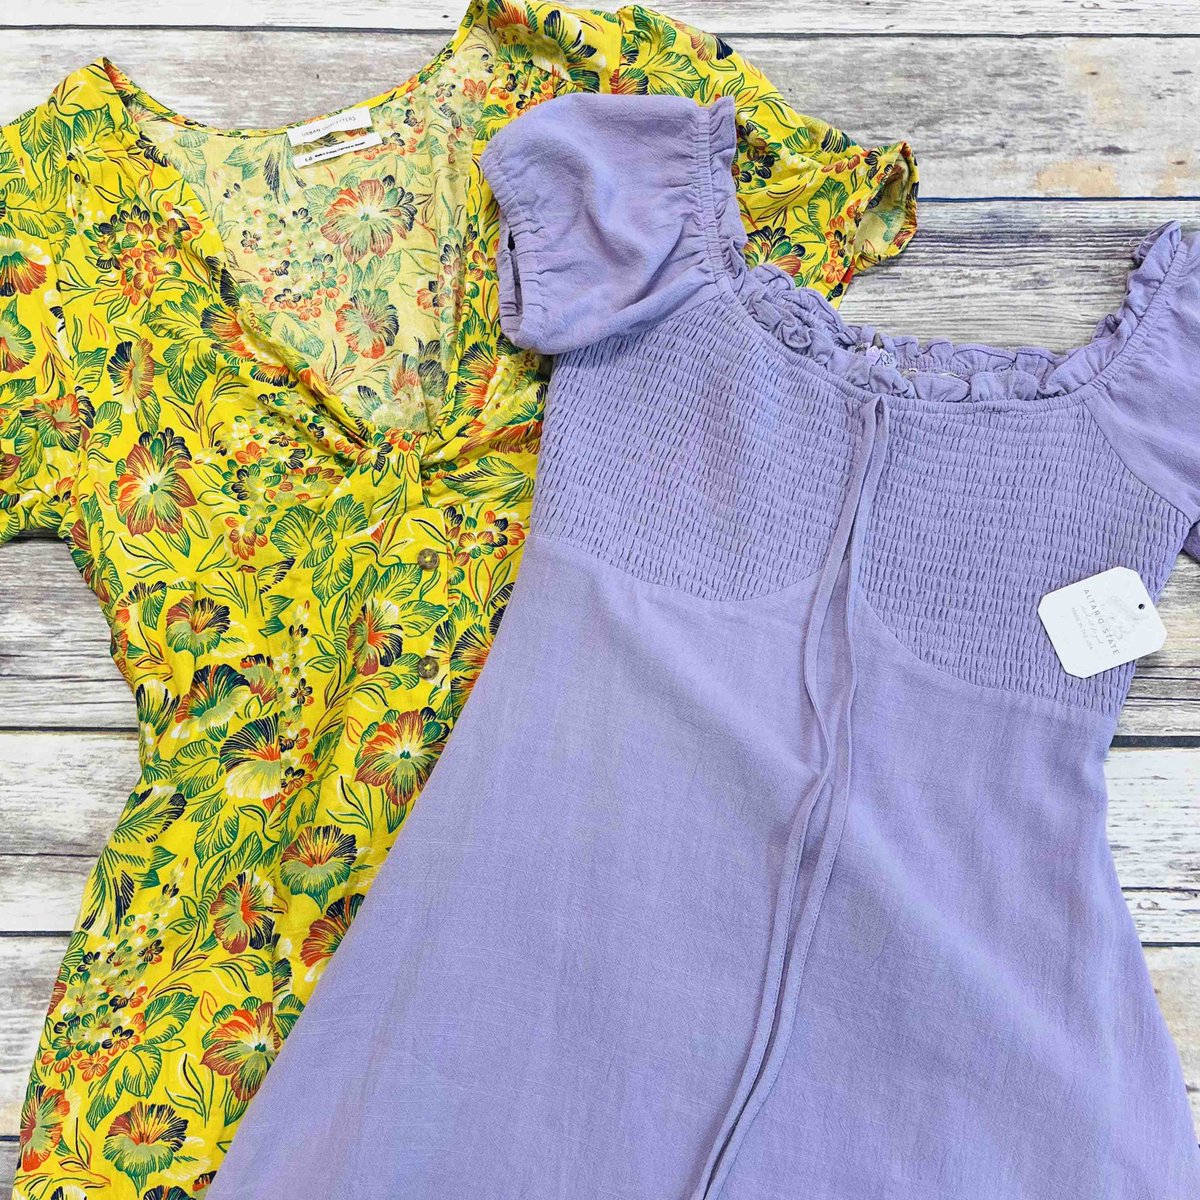 We have such cute dresses out on the floor right now! 🥰 find your next favorite outfit for less at Plato’s 🤩
———
#platoscloset #gentlyused #thriftedfashion #thriftedootd #outfitinspiration